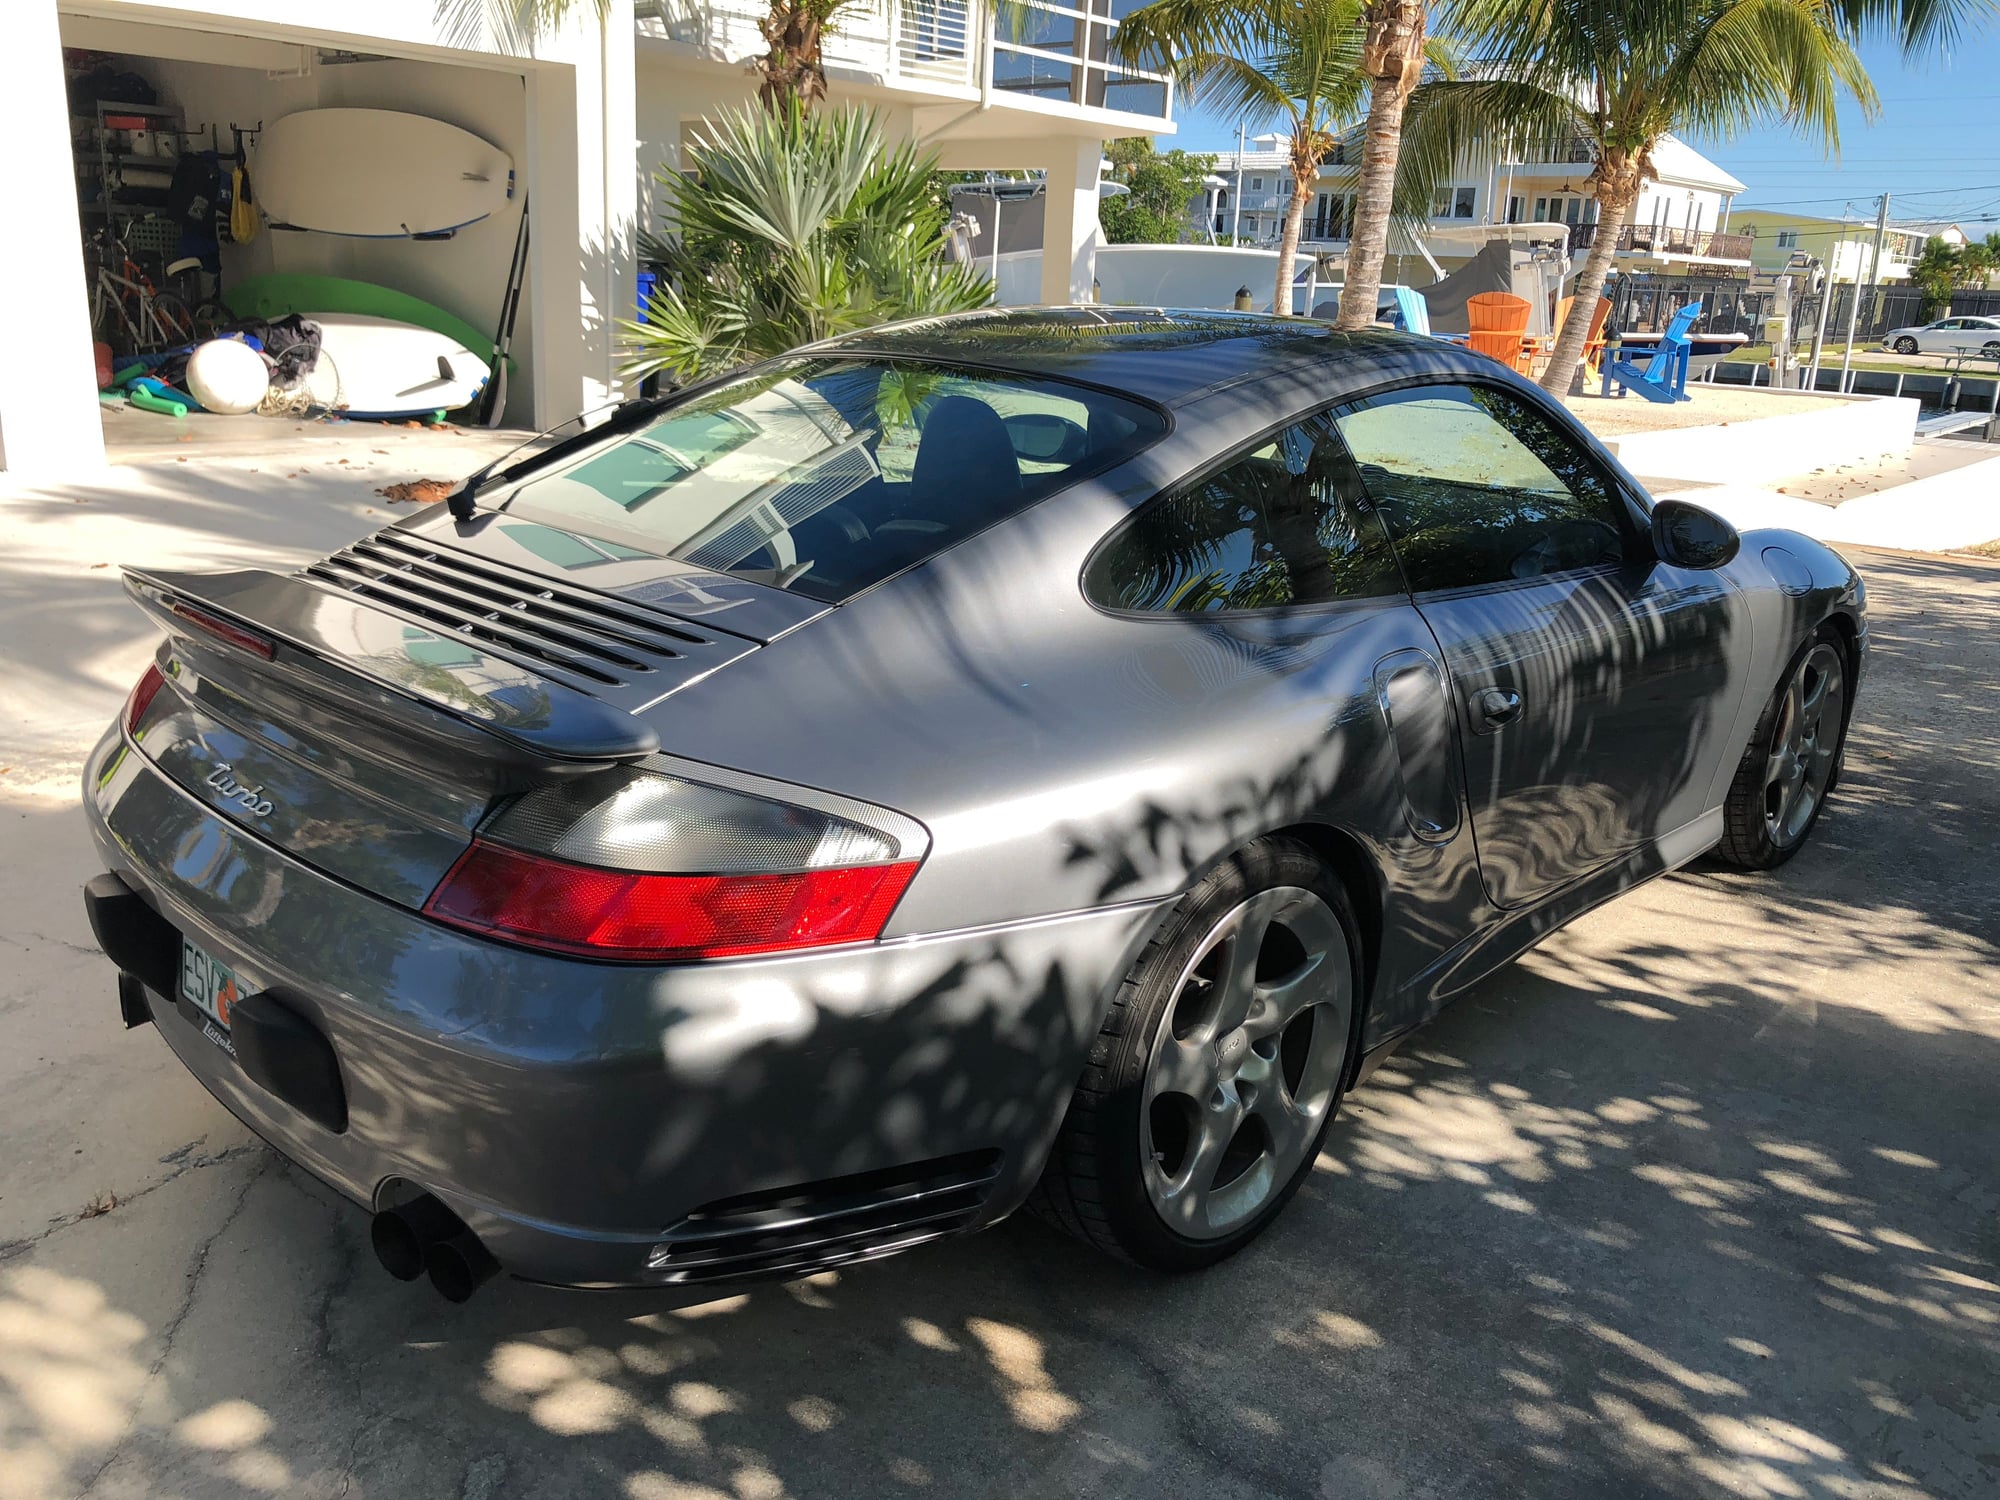 2003 Porsche 911 - 2003 996 Turbo For Sale - Seal Grey - Used - VIN WP0AB29983S686552 - 56,855 Miles - 6 cyl - Manual - Coupe - Silver - Key Largo, FL 33037, United States